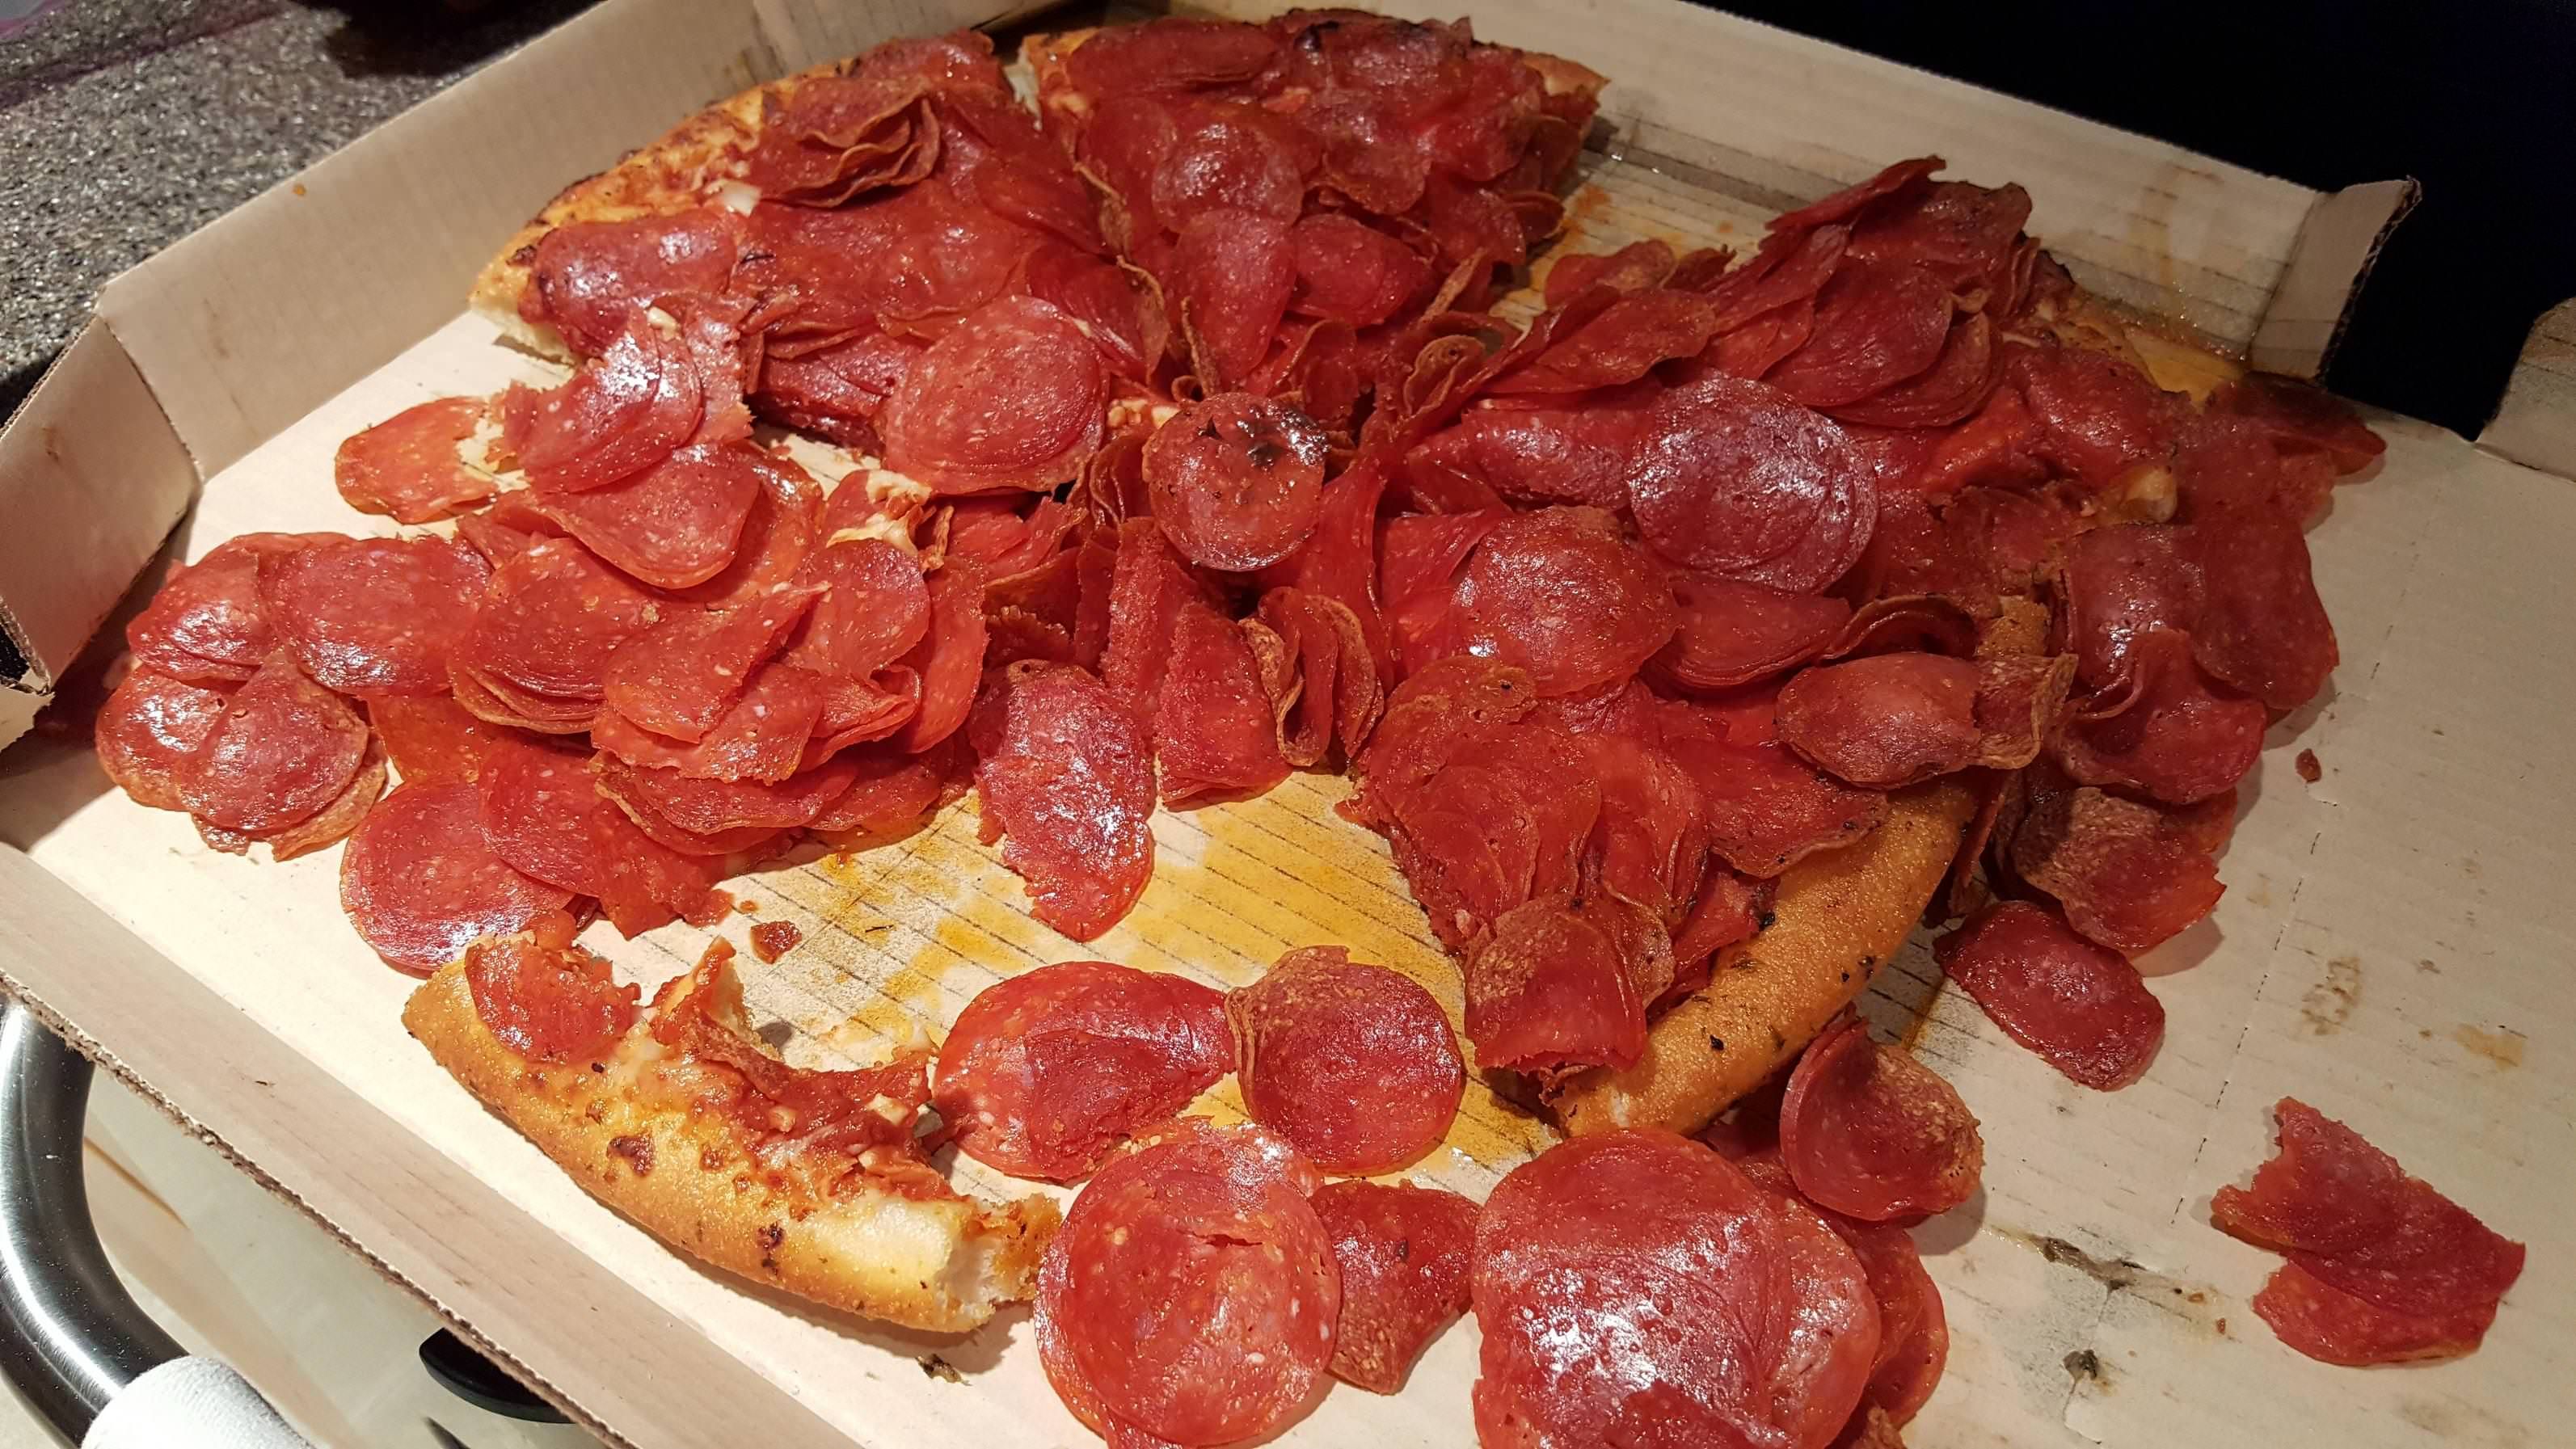 Asked for extra pepperoni. Pizza Hut got the memo.